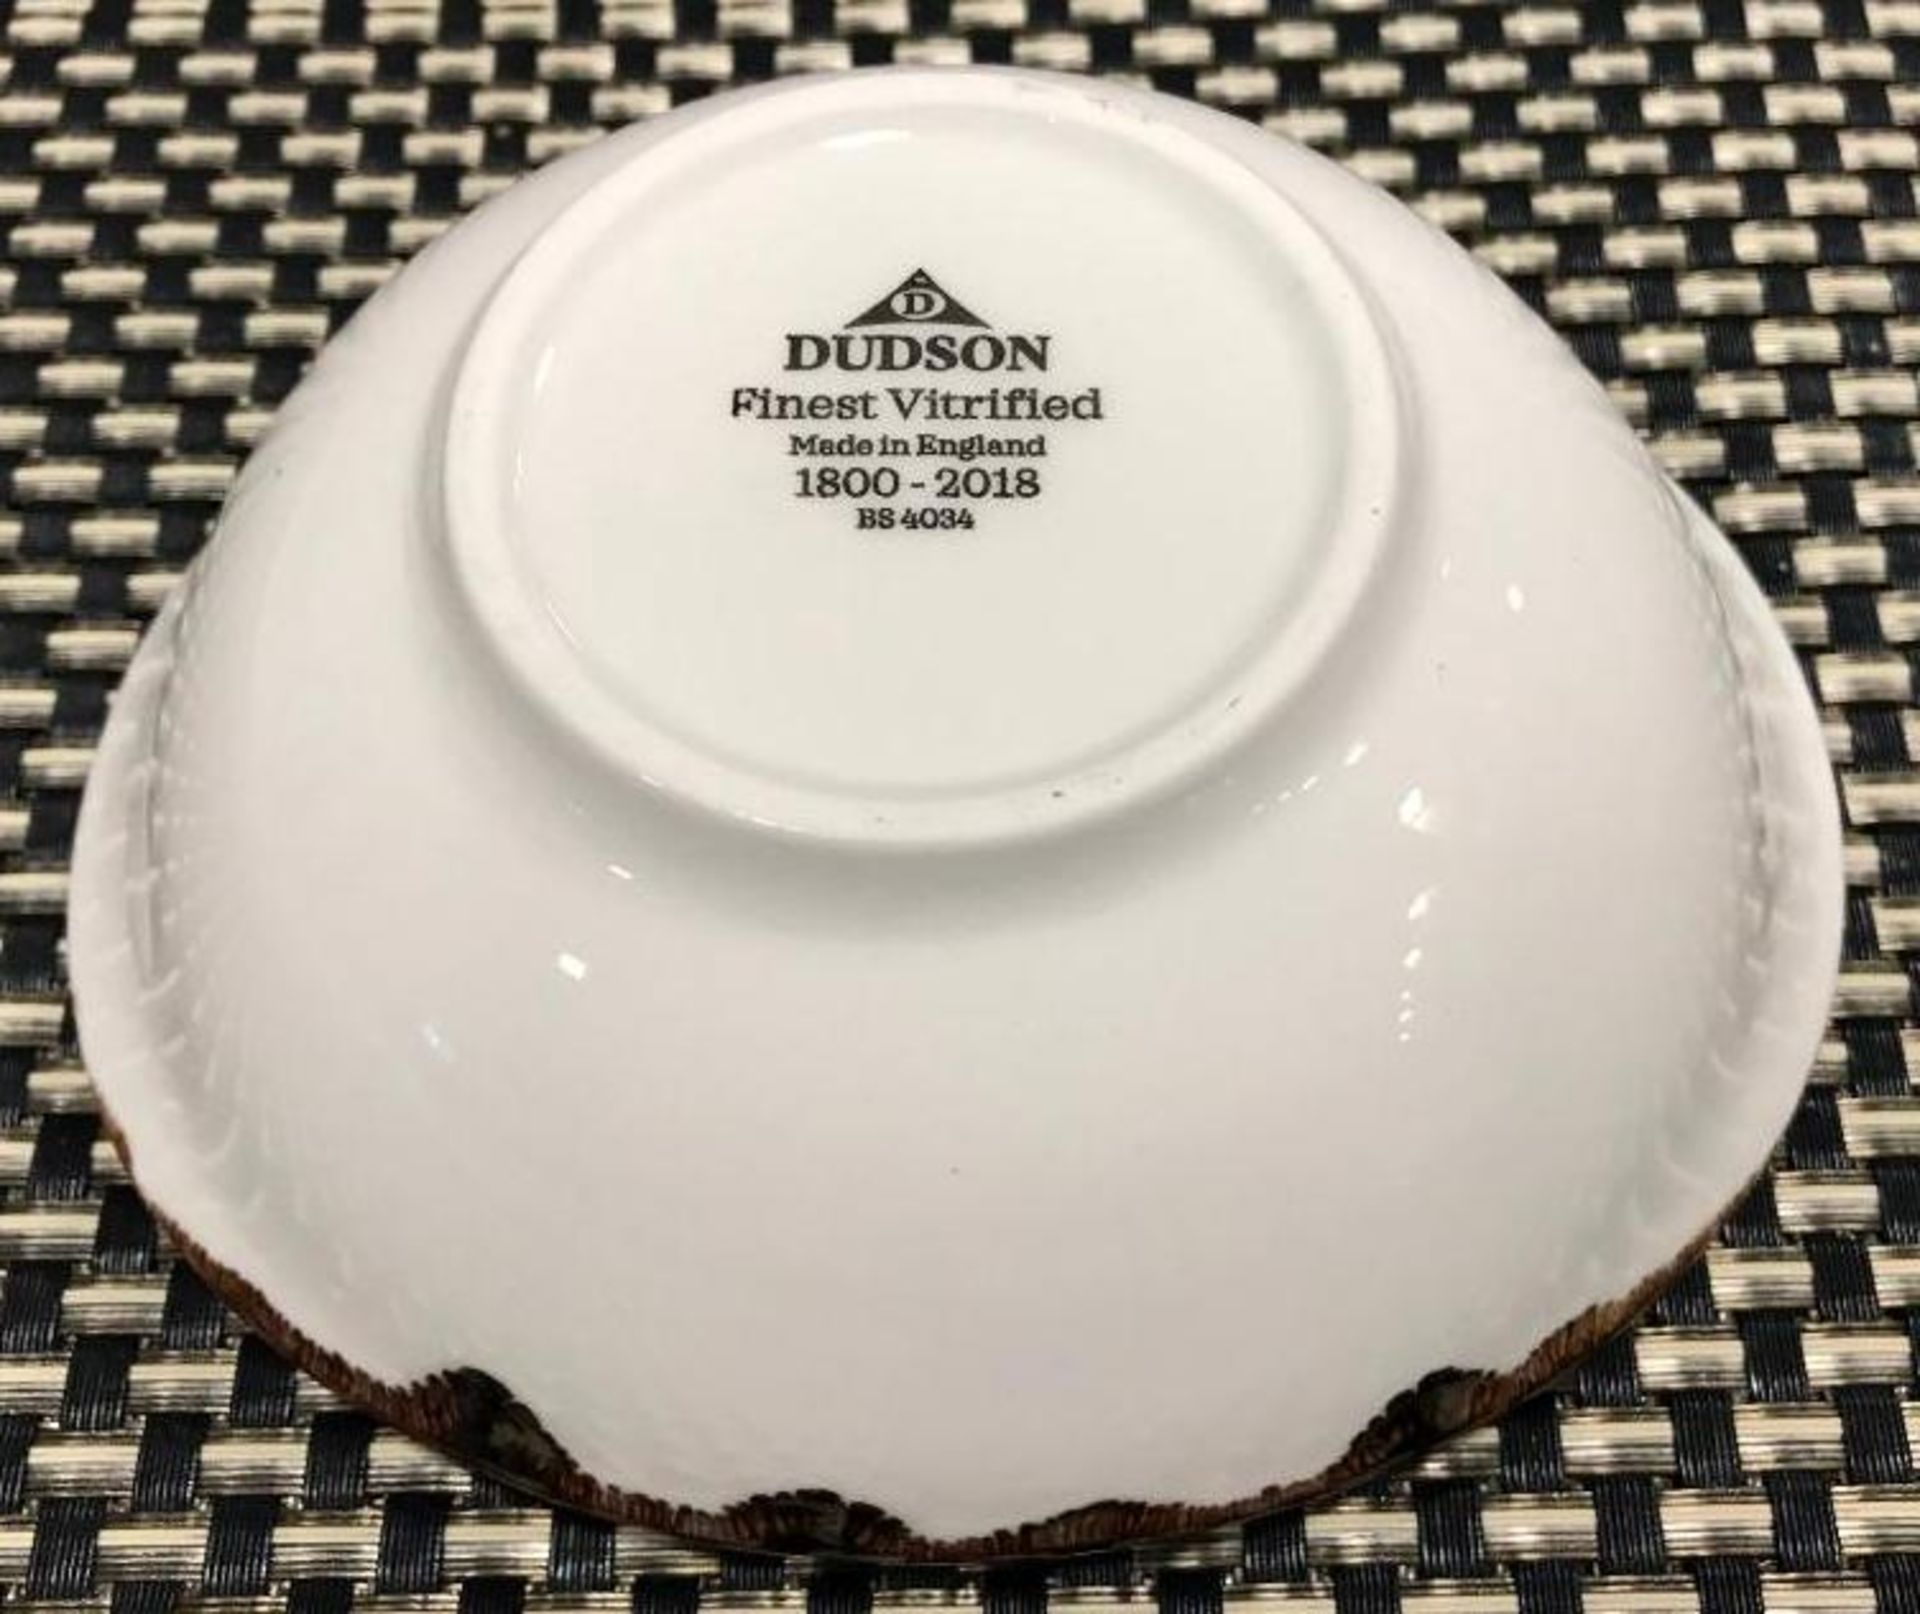 DUDSON HARVEST NATURAL DEEP BOWL 6.75" - 6/CASE, MADE IN ENGLAND - Image 4 of 5